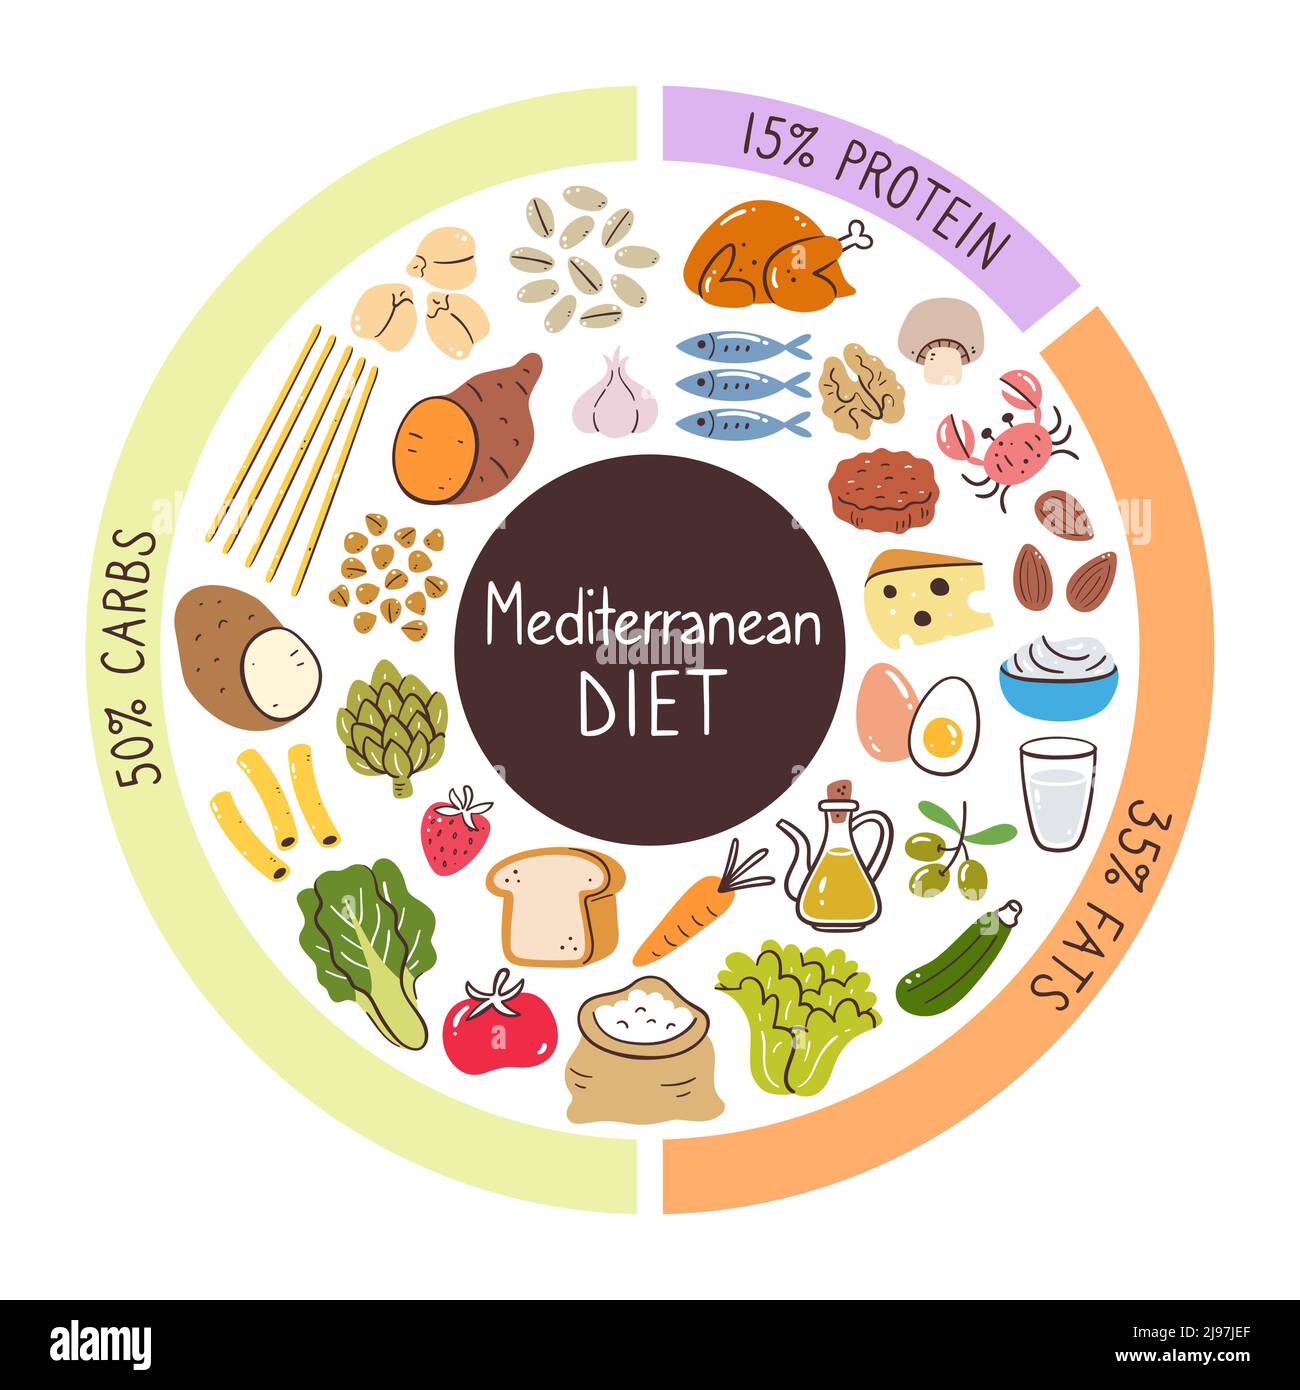 Mediterranean diet food ingredients. Percentages of carbs, protein, and fats most used in this diet. Food icon collection. Stock Vector